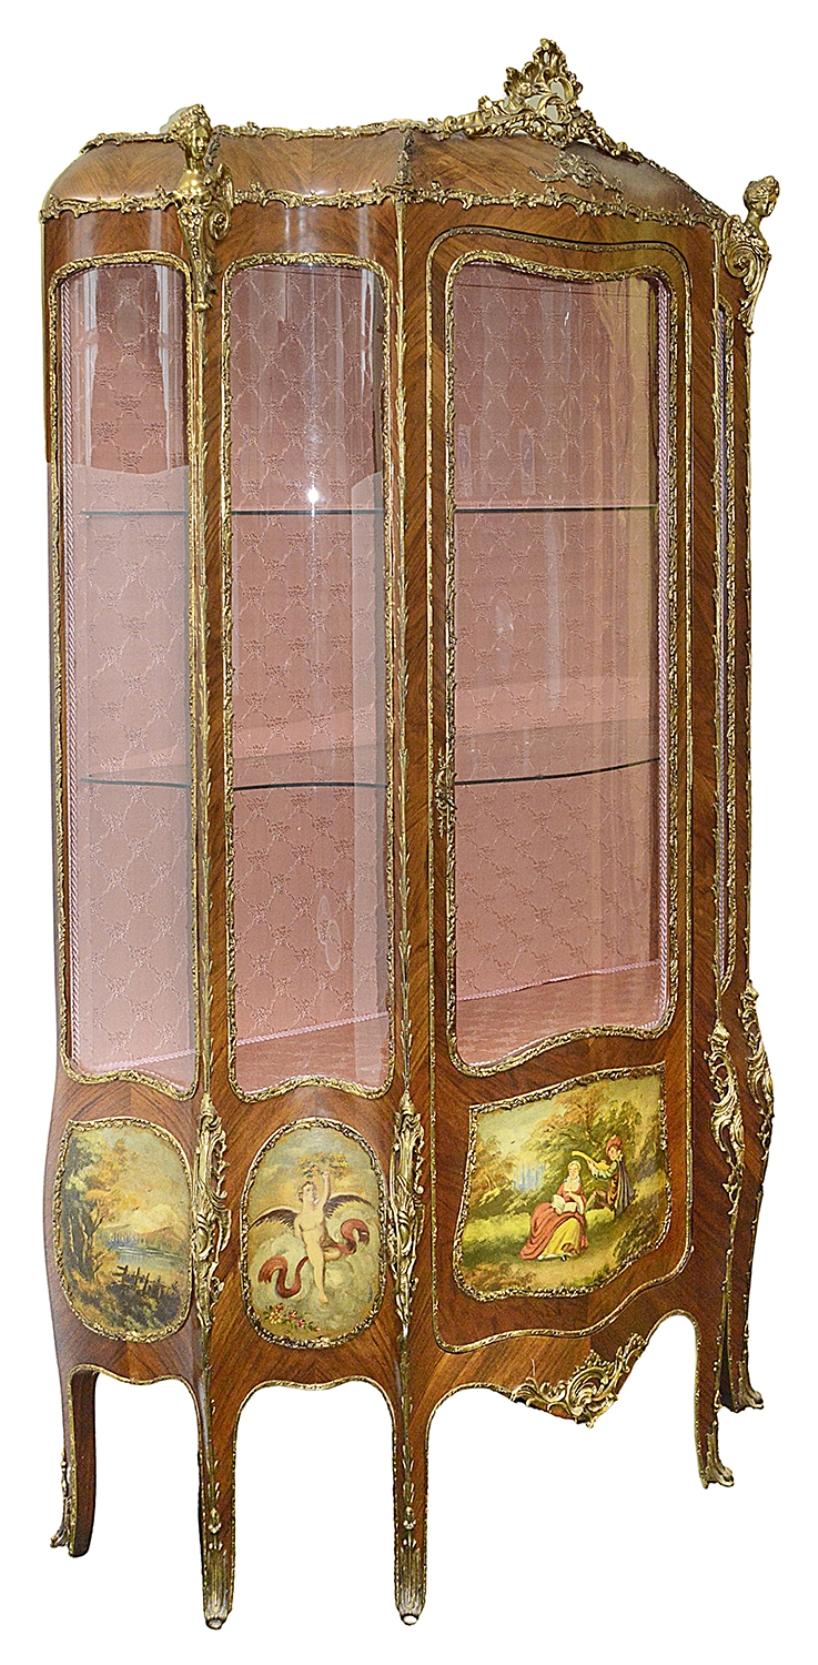 A good quality late 19th century French Louis XVI style bombe fronted vitrine, having classical gilded scrolling foliate and monopodia ormolu mounts, shaped and bowed glass pains and door, hand painted panels depicting lakeland scenes, classical